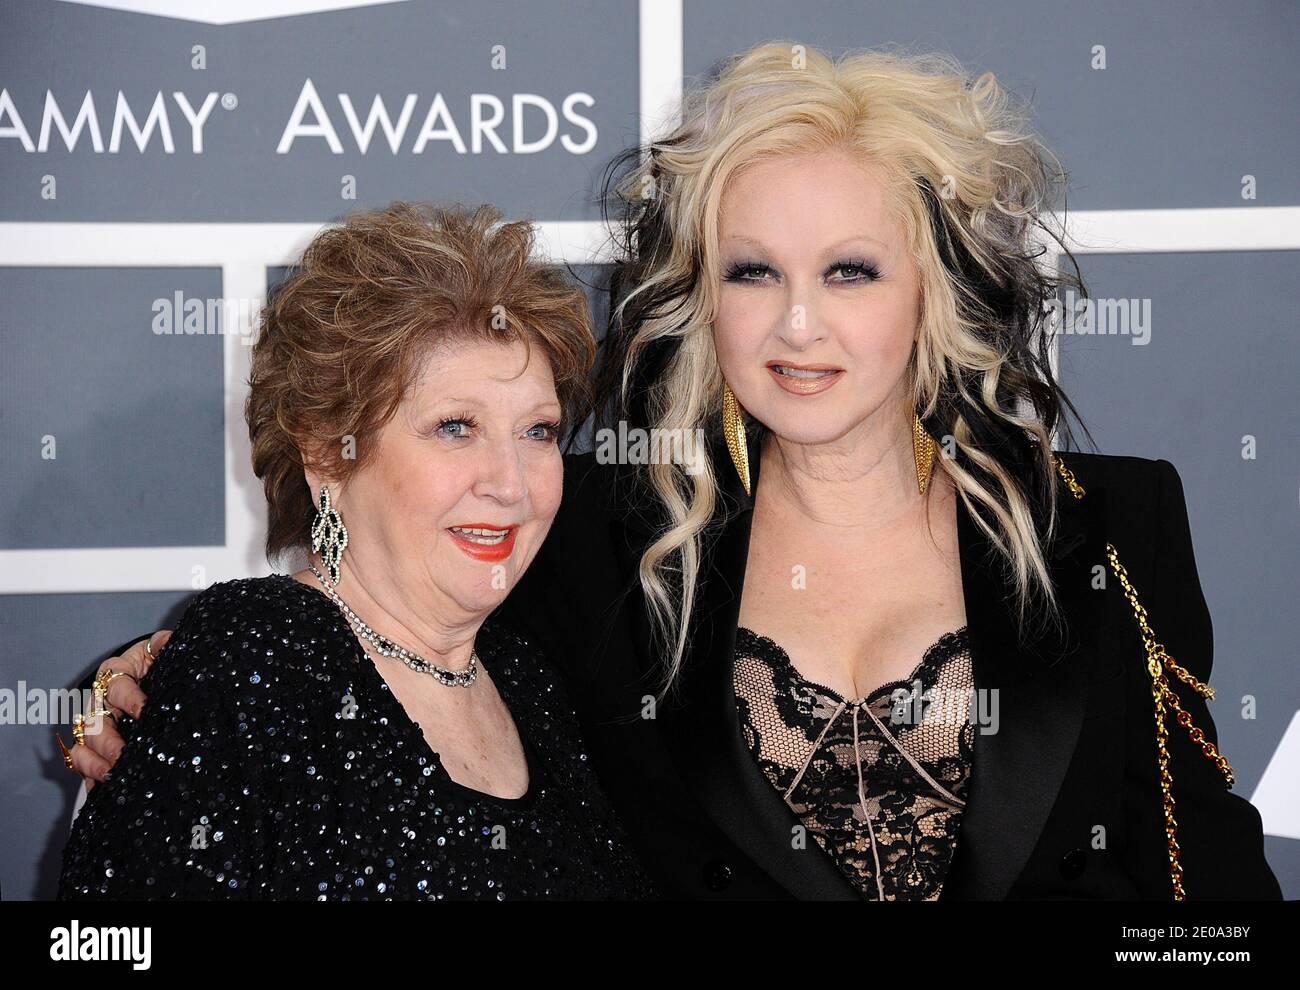 Cyndi Lauper and Catrine Dominique (left) arriving at the 54th Annual Grammy Awards held at the Staples Center in Los Angeles, CA, USA on February 12, 2012. Photo by Lionel Hahn/ABACAPRESS.COM Stock Photo